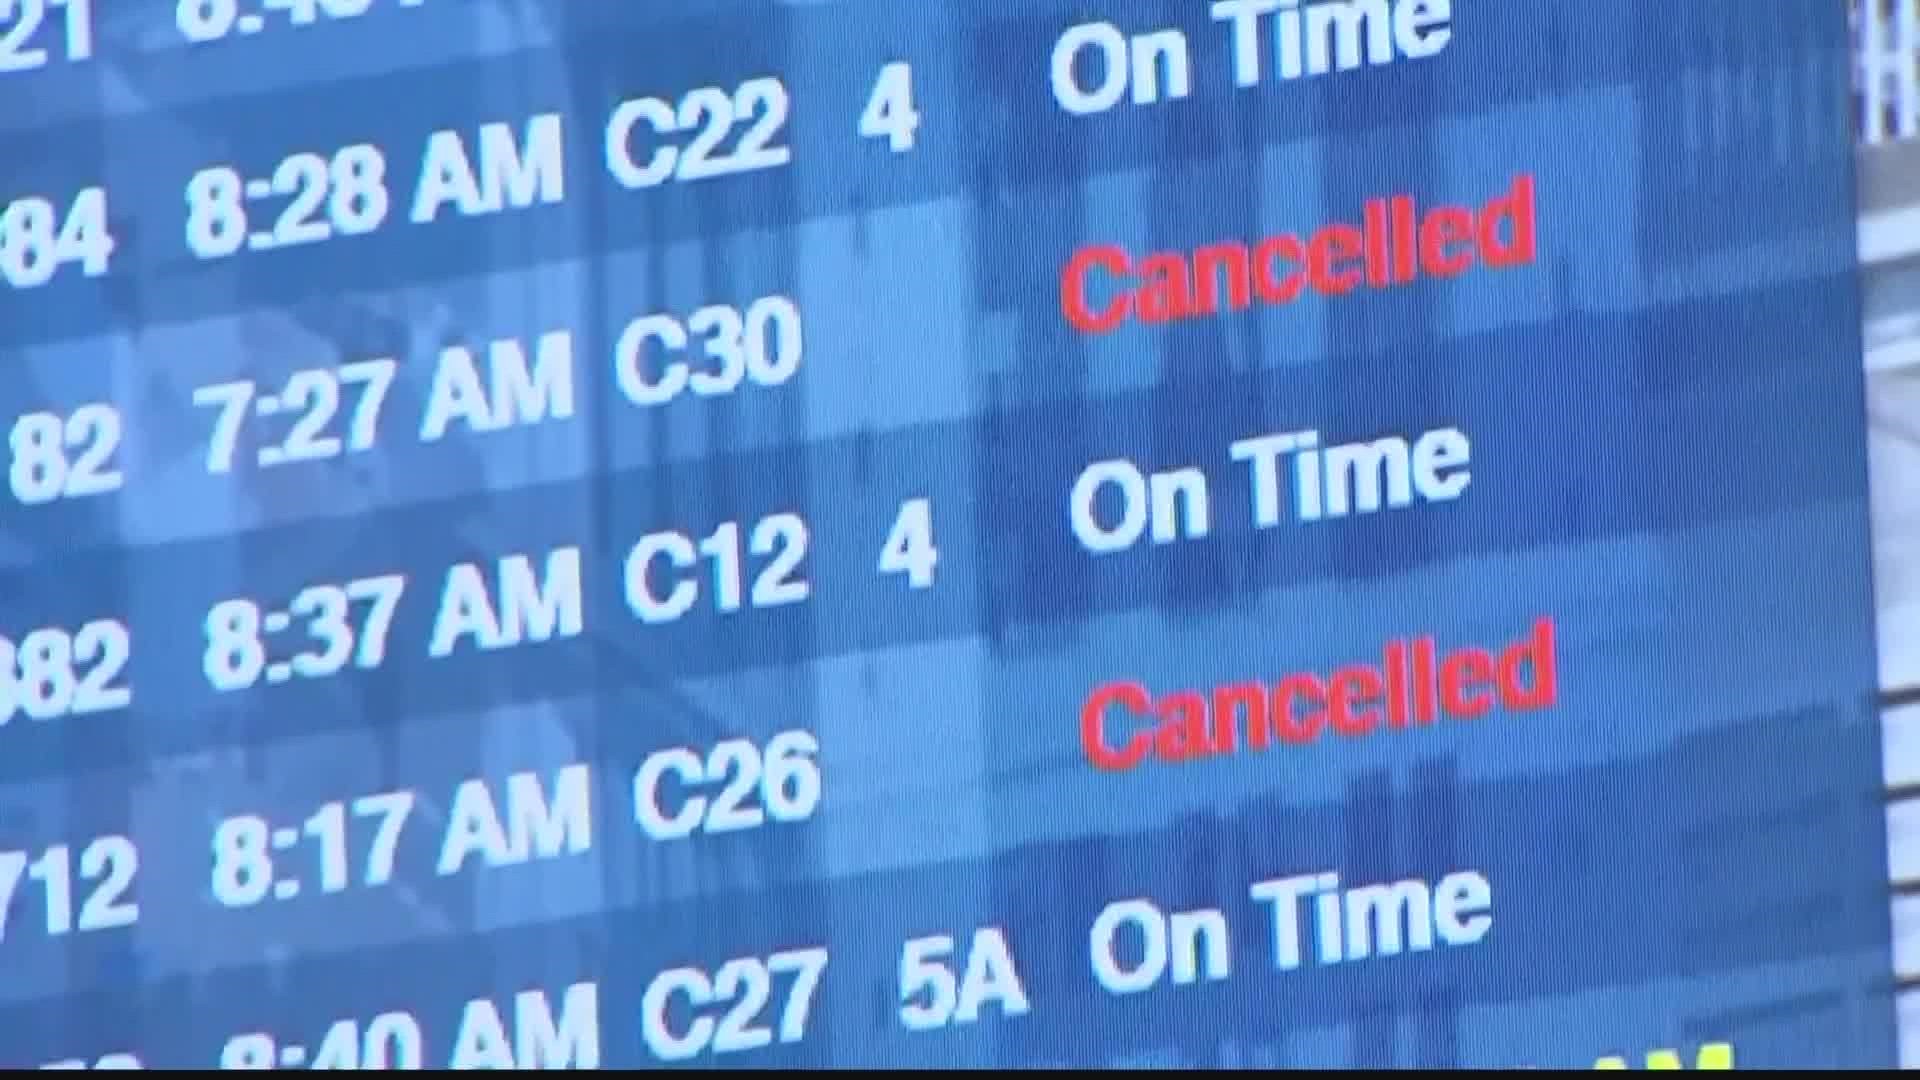 The issues continued on Sunday with dozens of flights canceled and hundreds of delays.